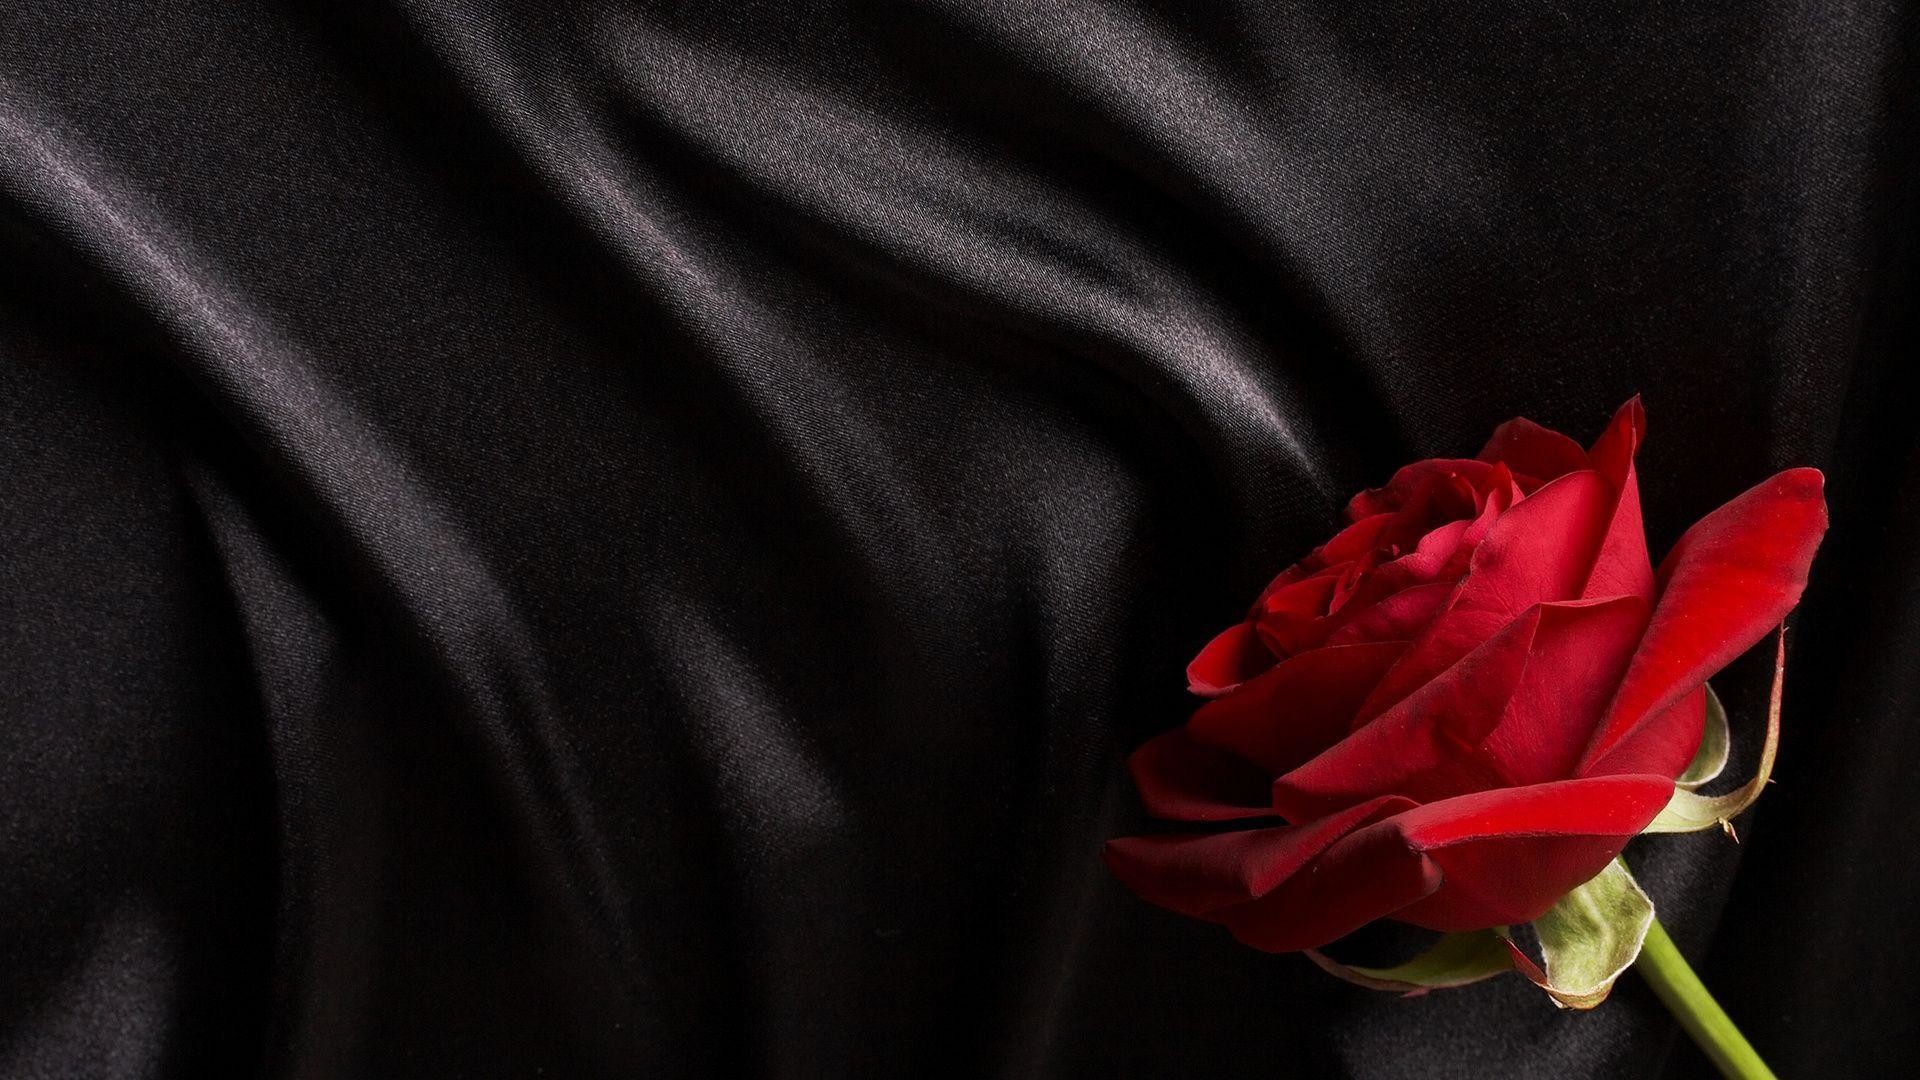 1920x1080 Black and Red Roses | Red And Black Rose Wallpapers 8 Wide .